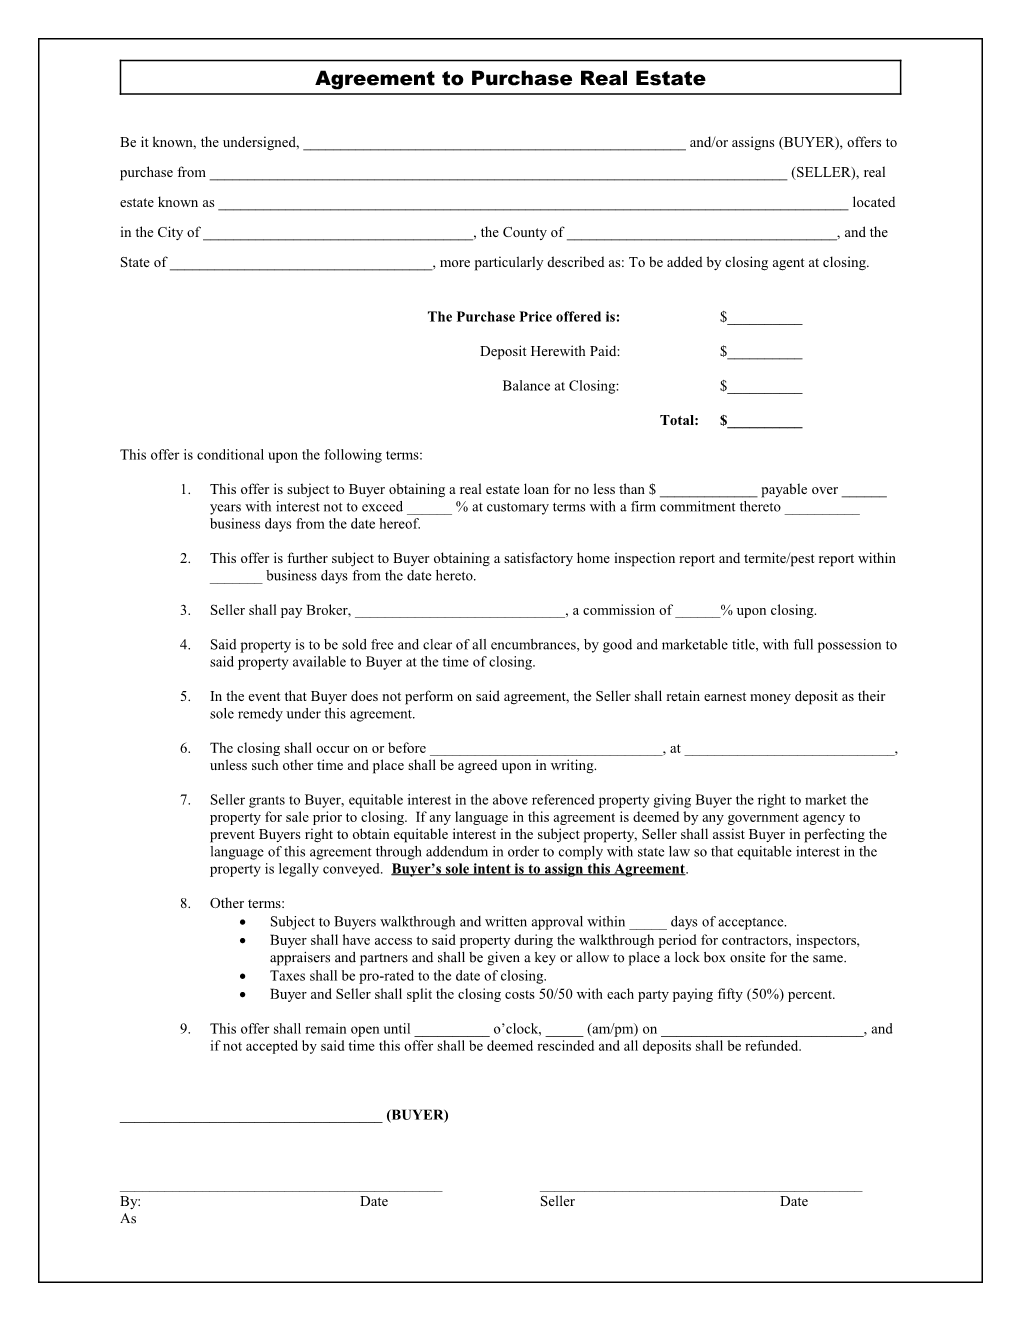 Contract to Purchase Real Estate